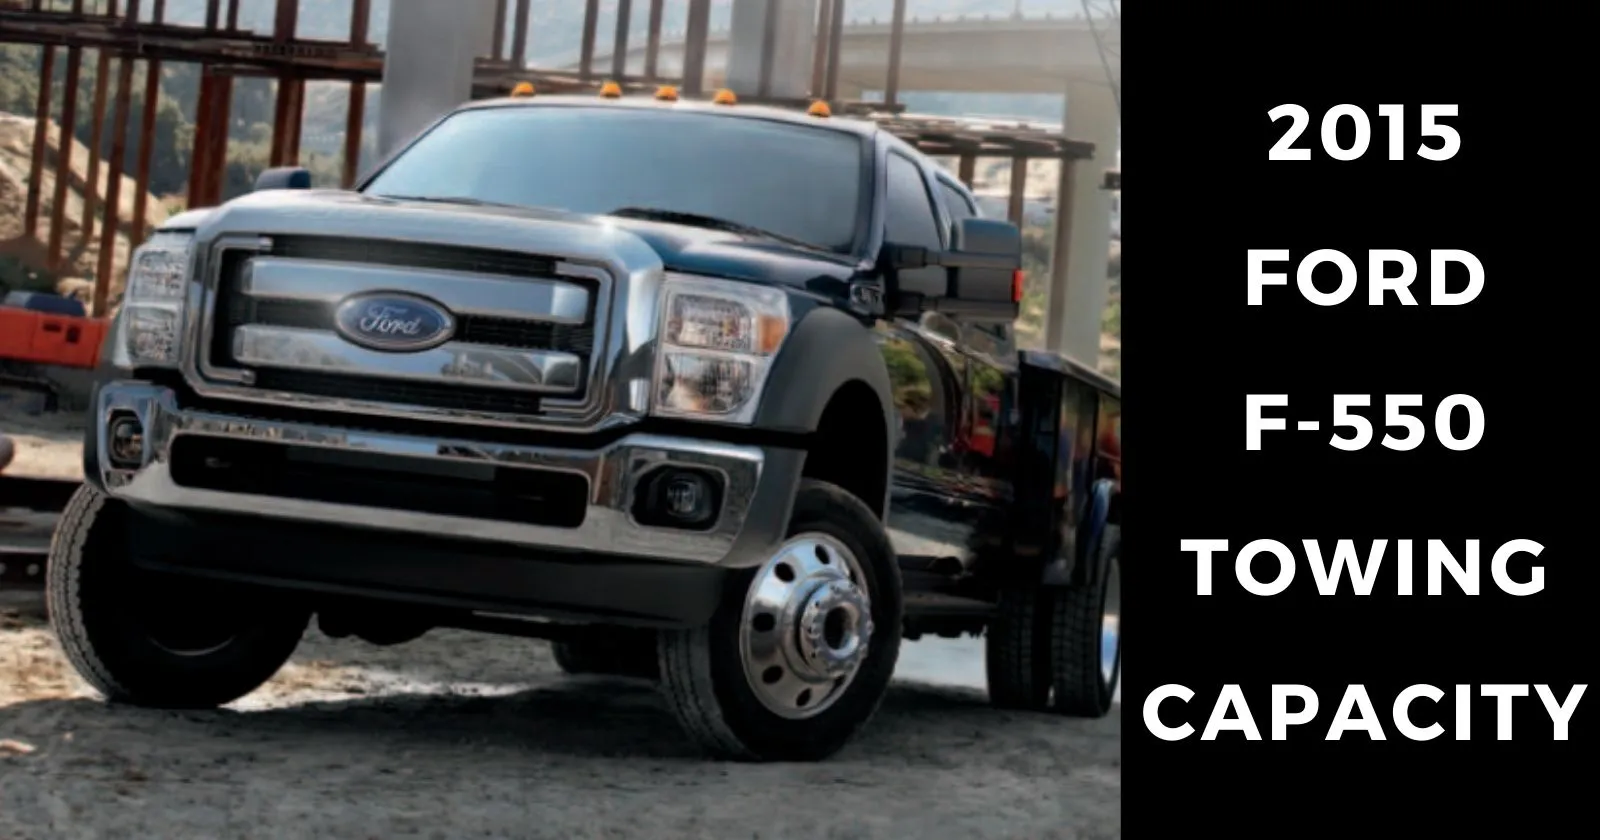 2015-ford-f550-towing-capacity-with-charts-thecartowing